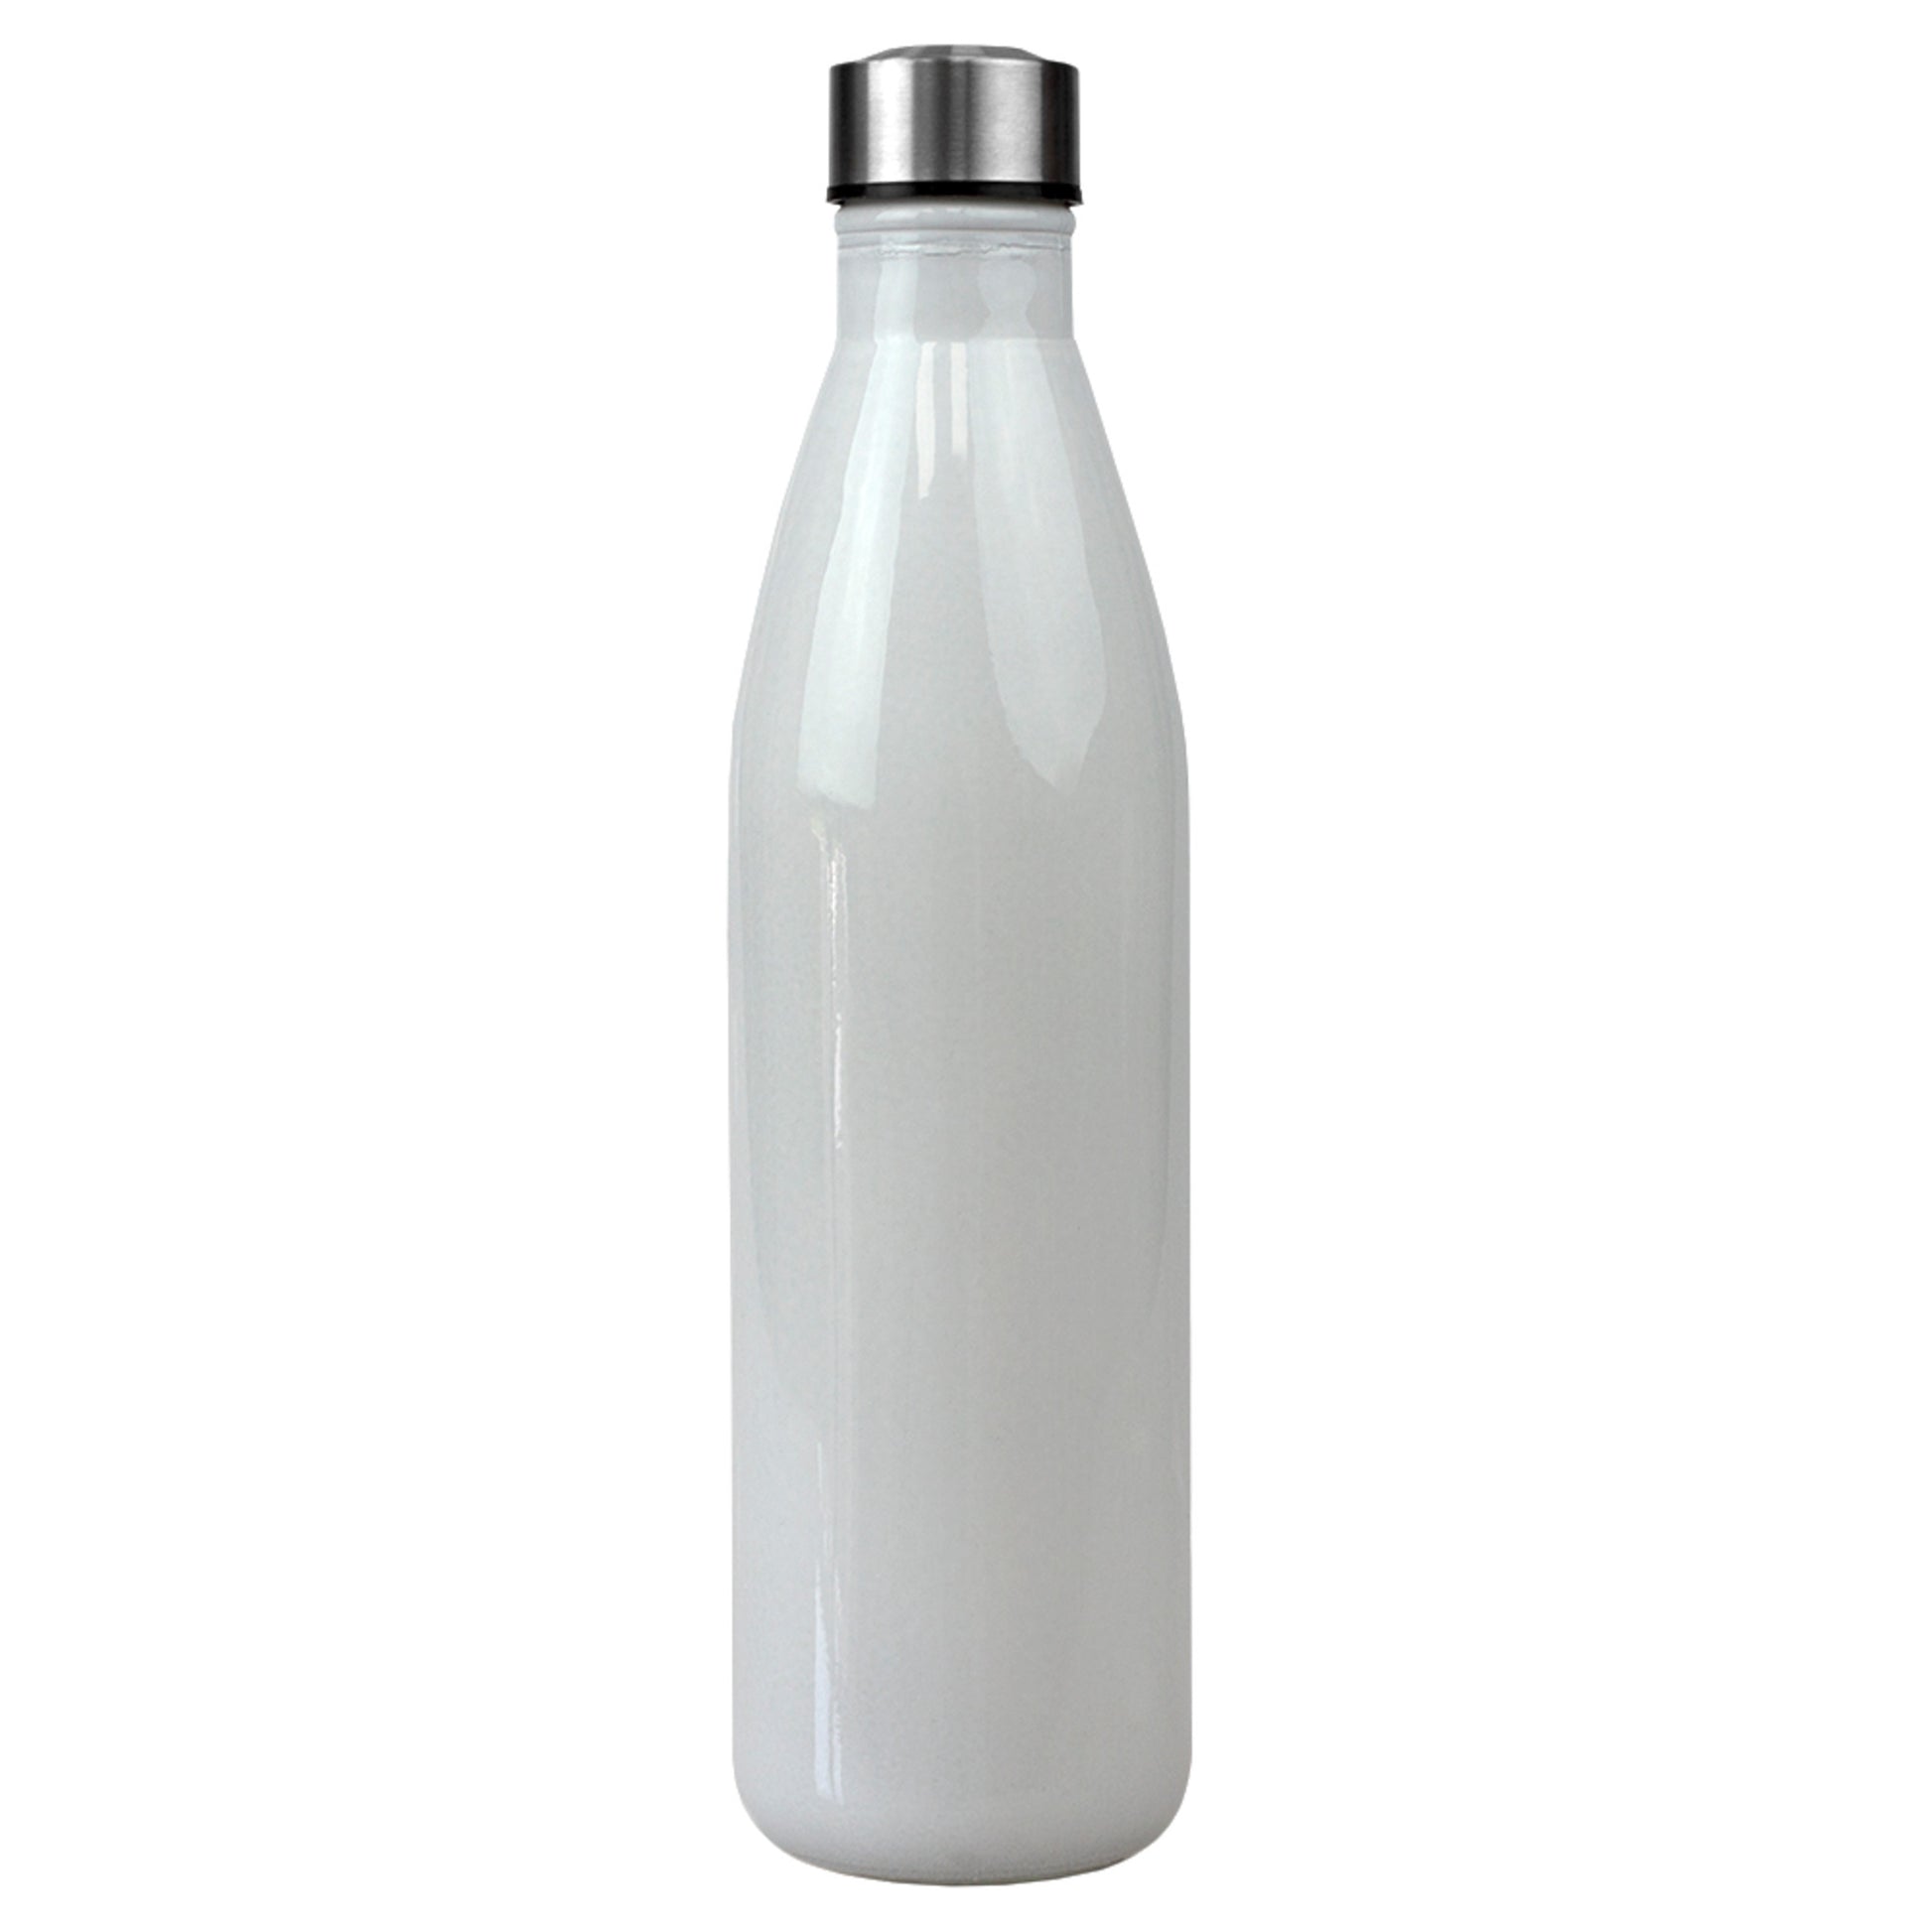 Home Basics Solid 32 oz. Glass Travel Water Bottle with Easy Twist-on Leak Proof Steel Cap, White - White